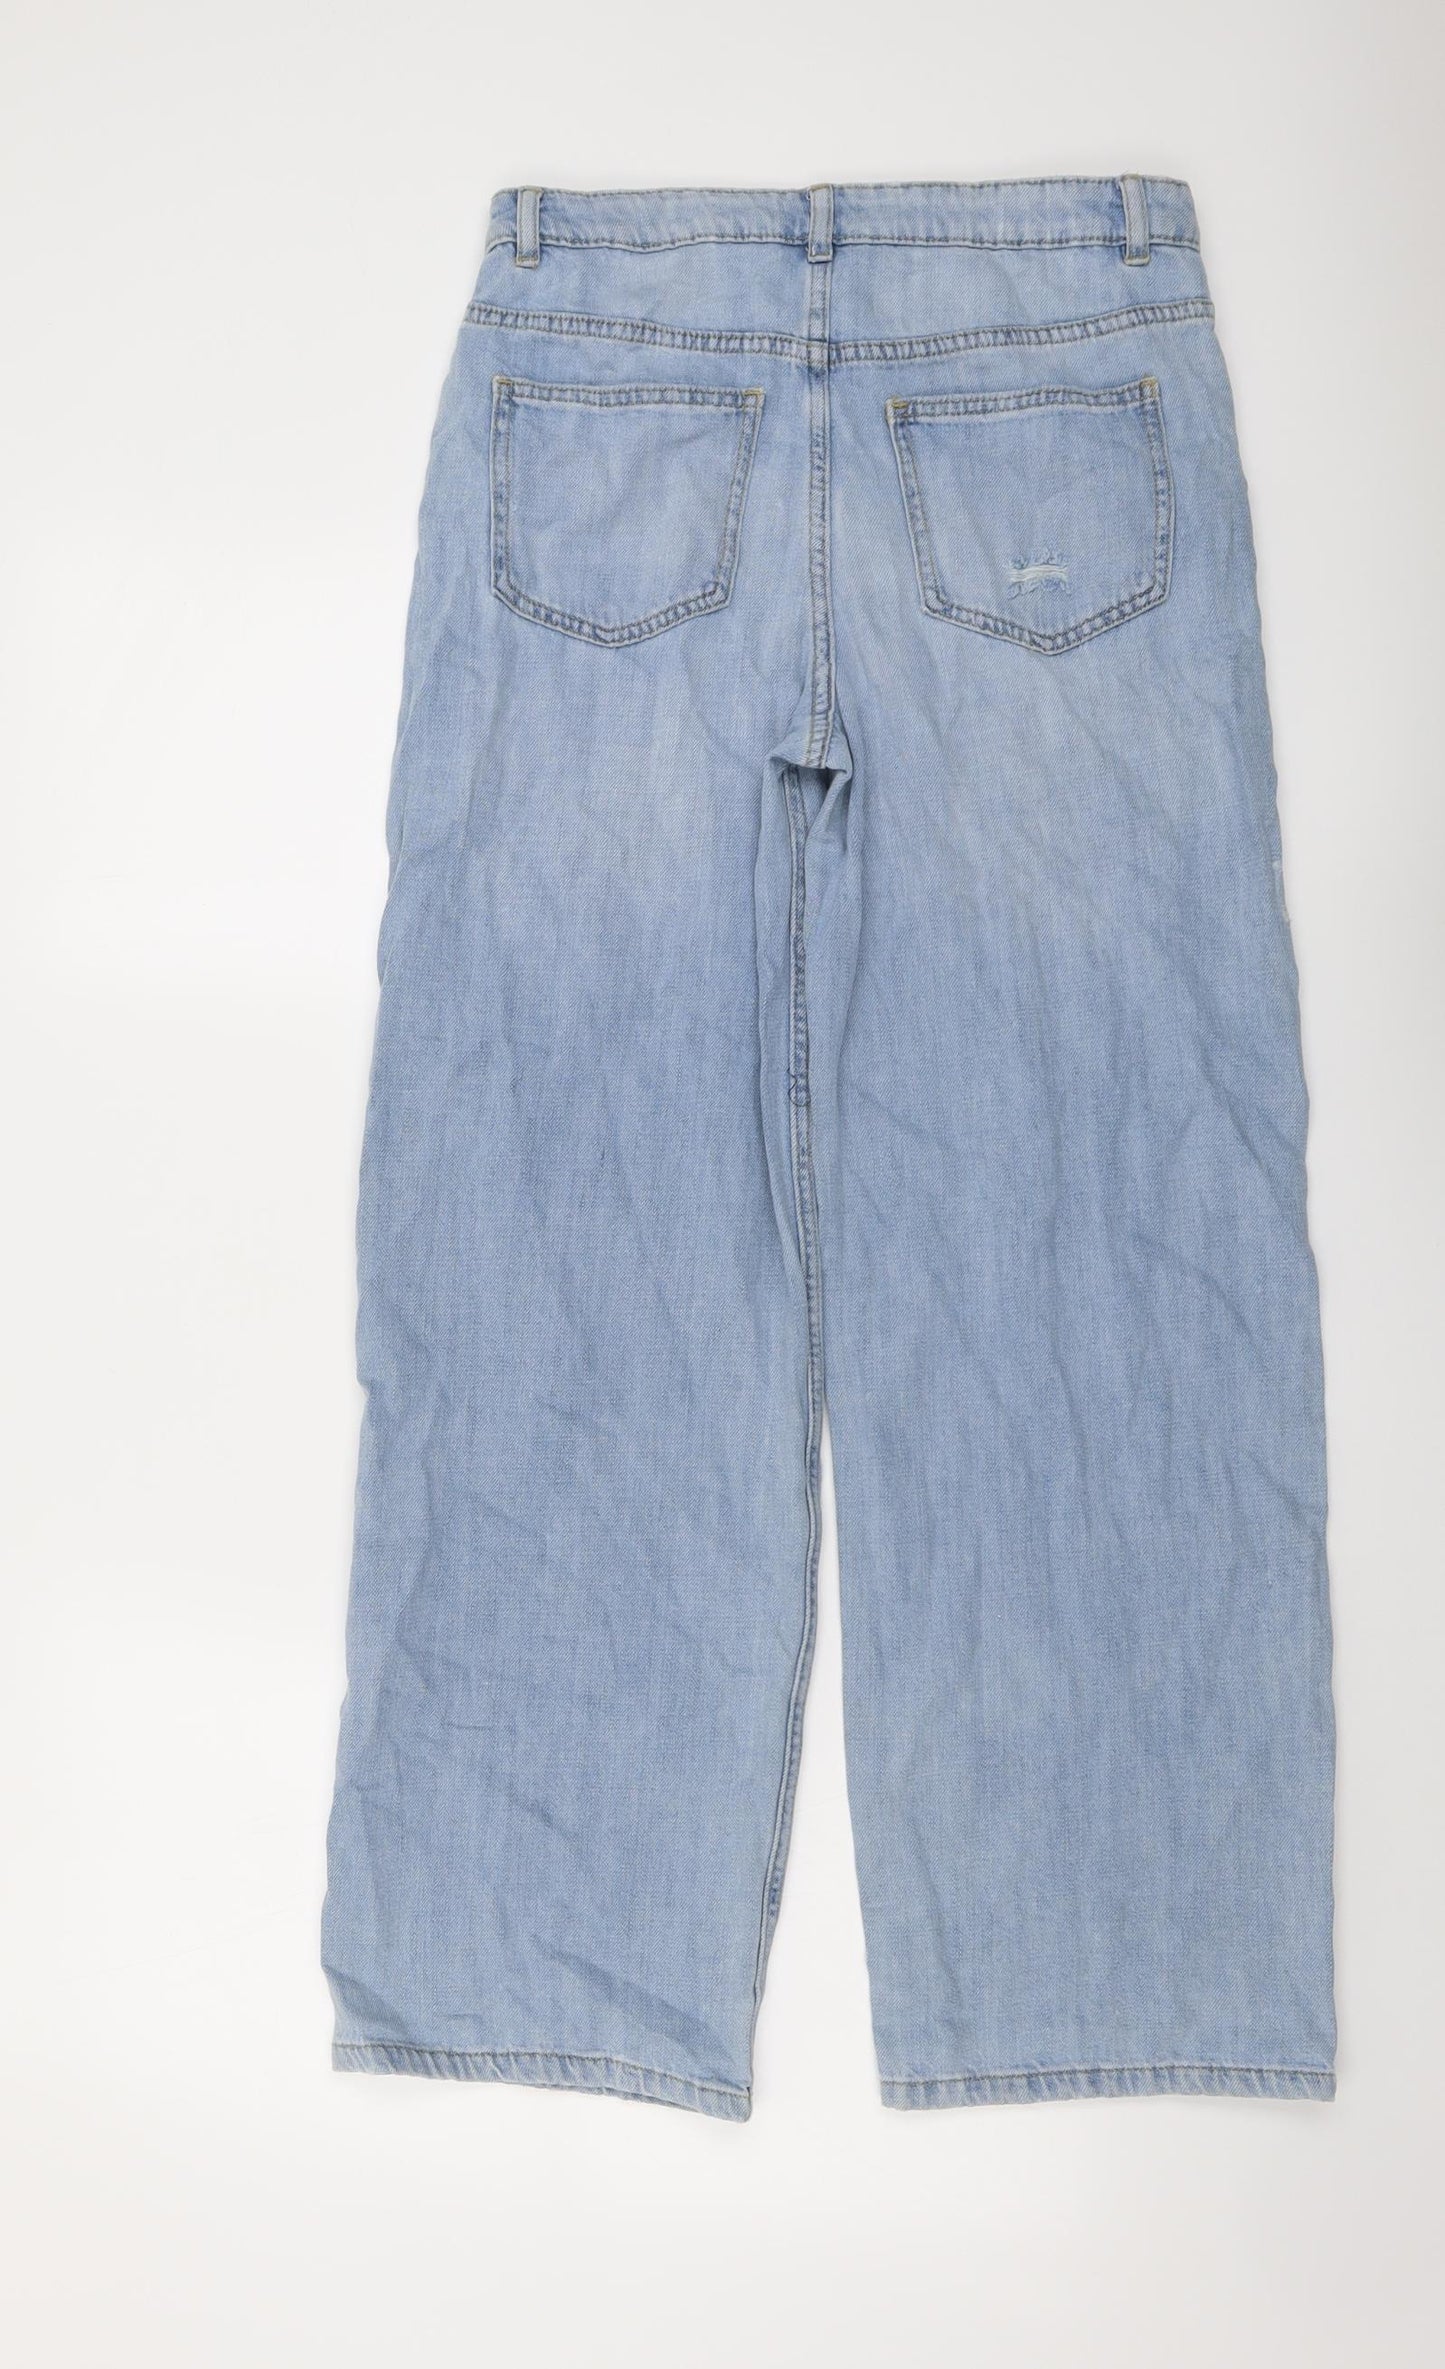 Marks and Spencer Girls Blue Cotton Wide-Leg Jeans Size 13-14 Years Regular Button - Distressed